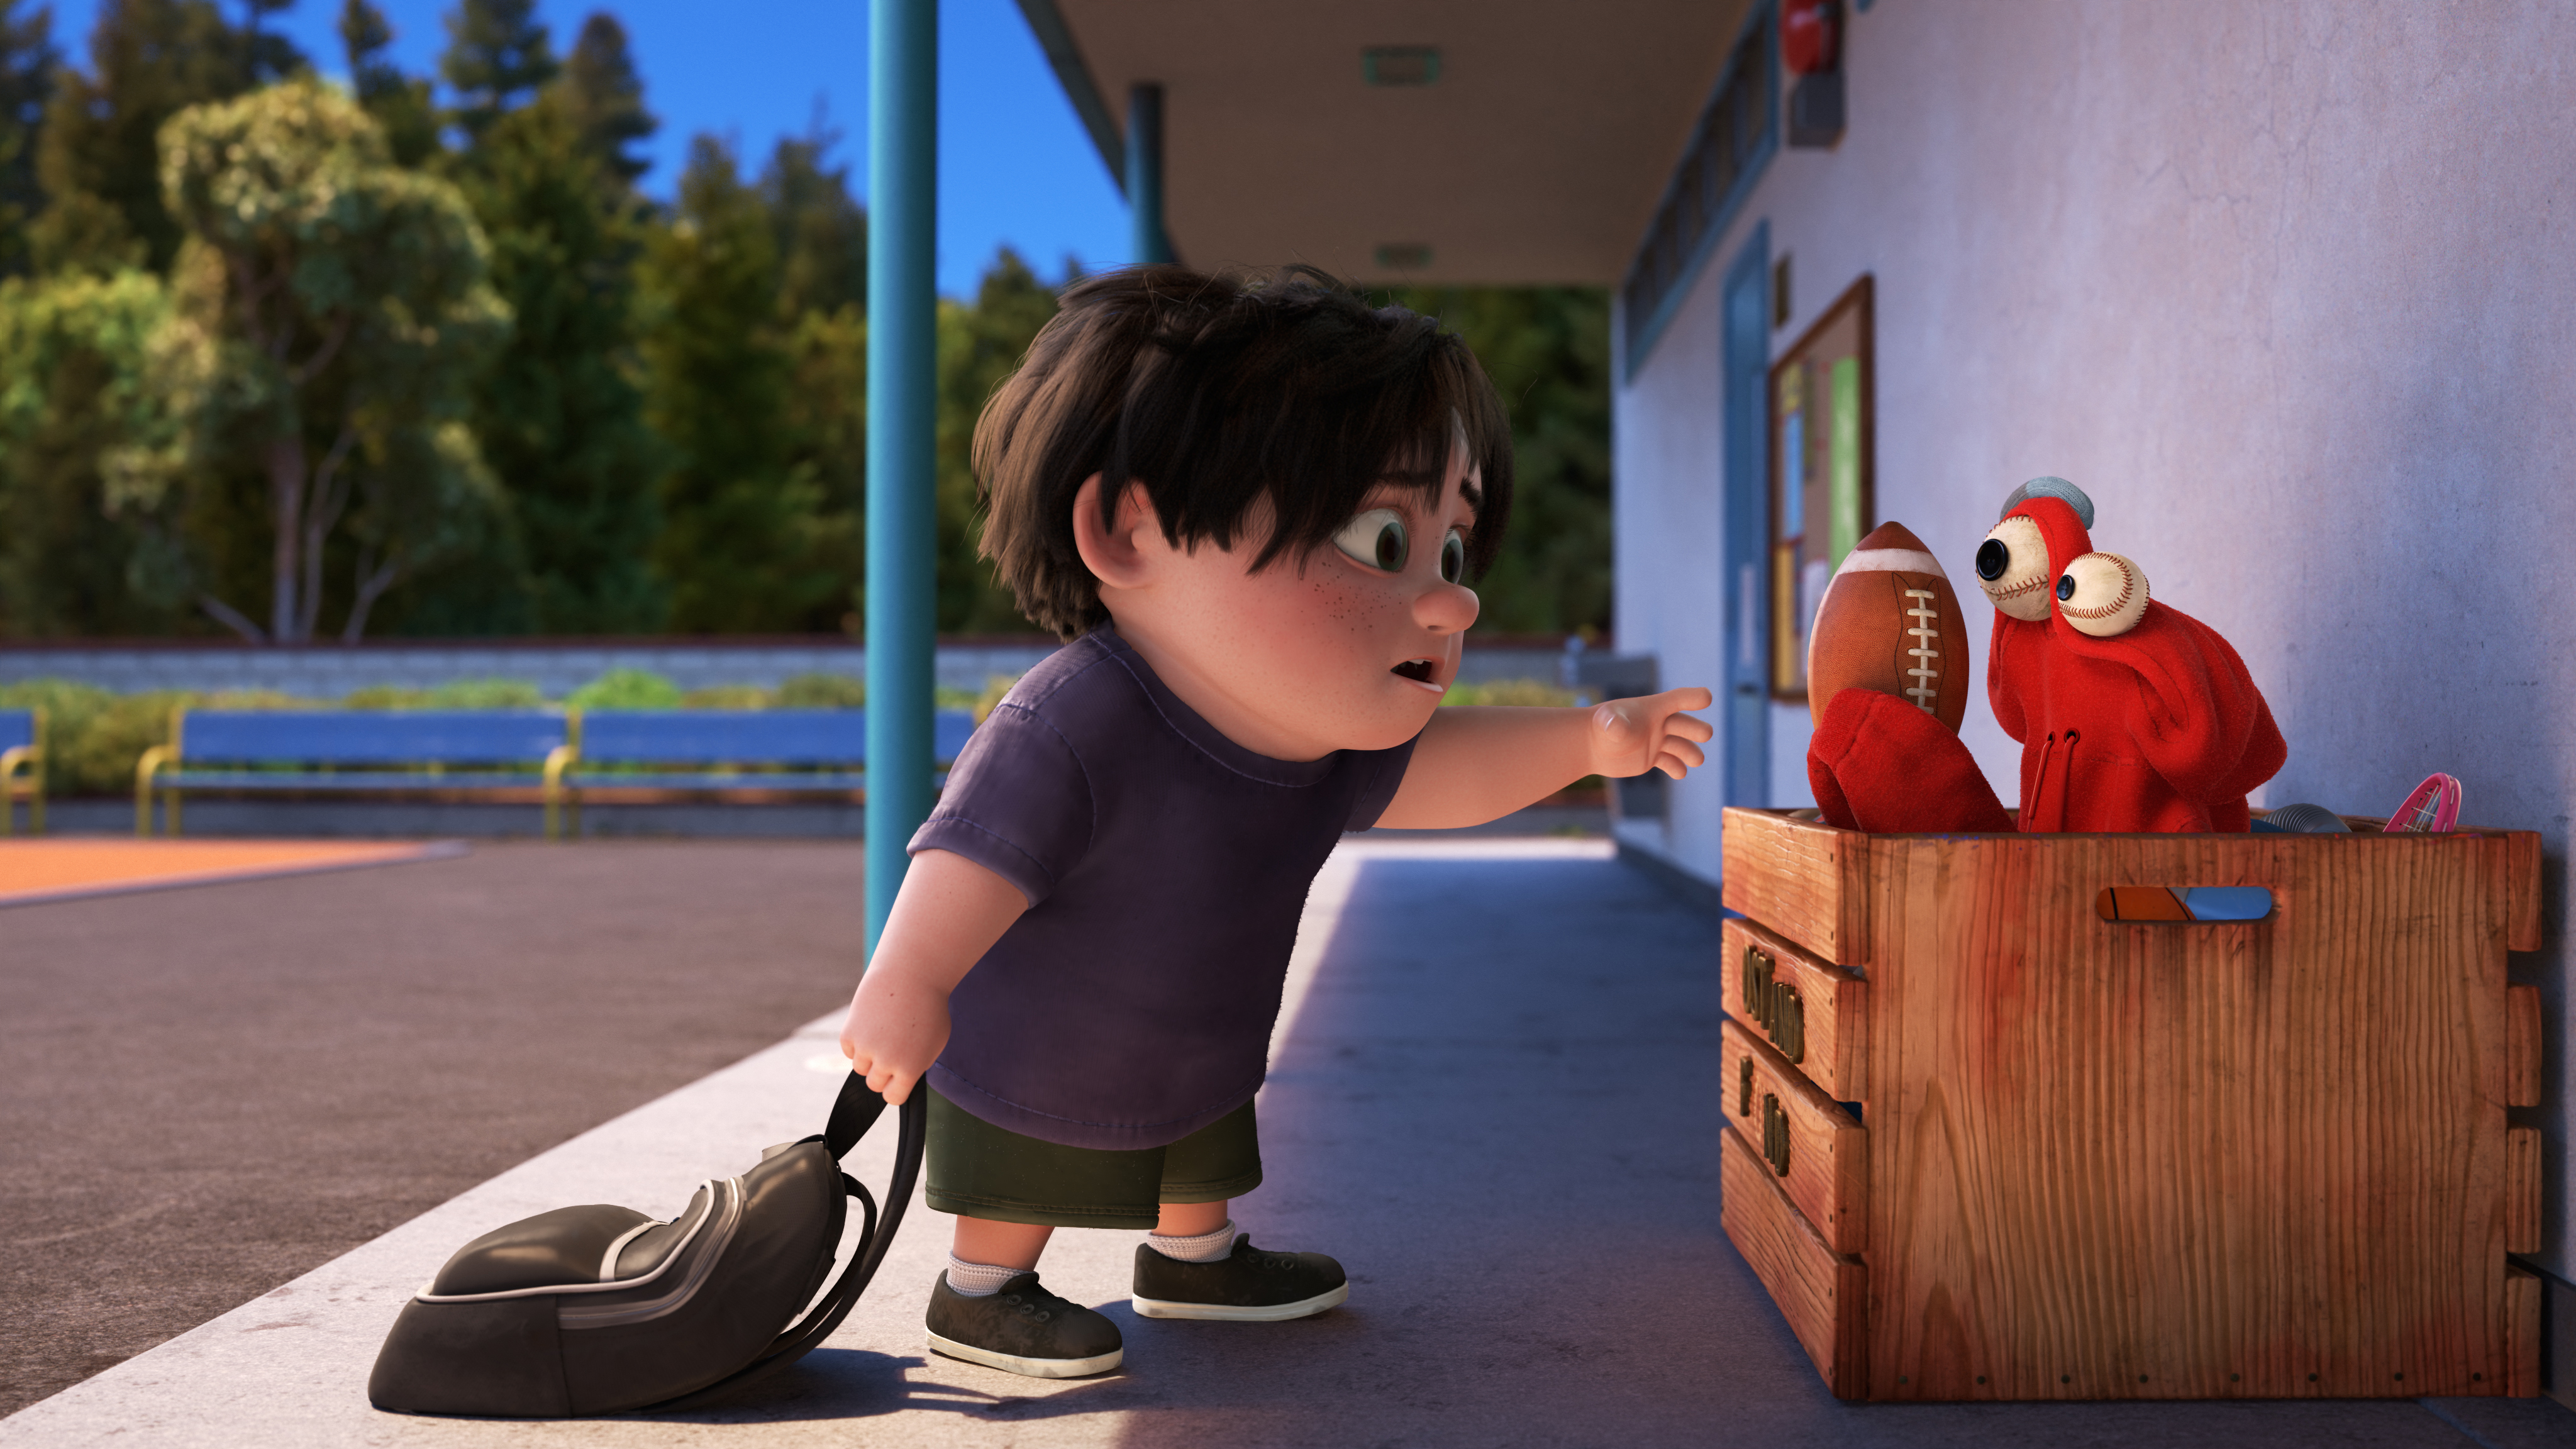 The Pixar Short Film Lou Is An Impressive & Touching Achievement in